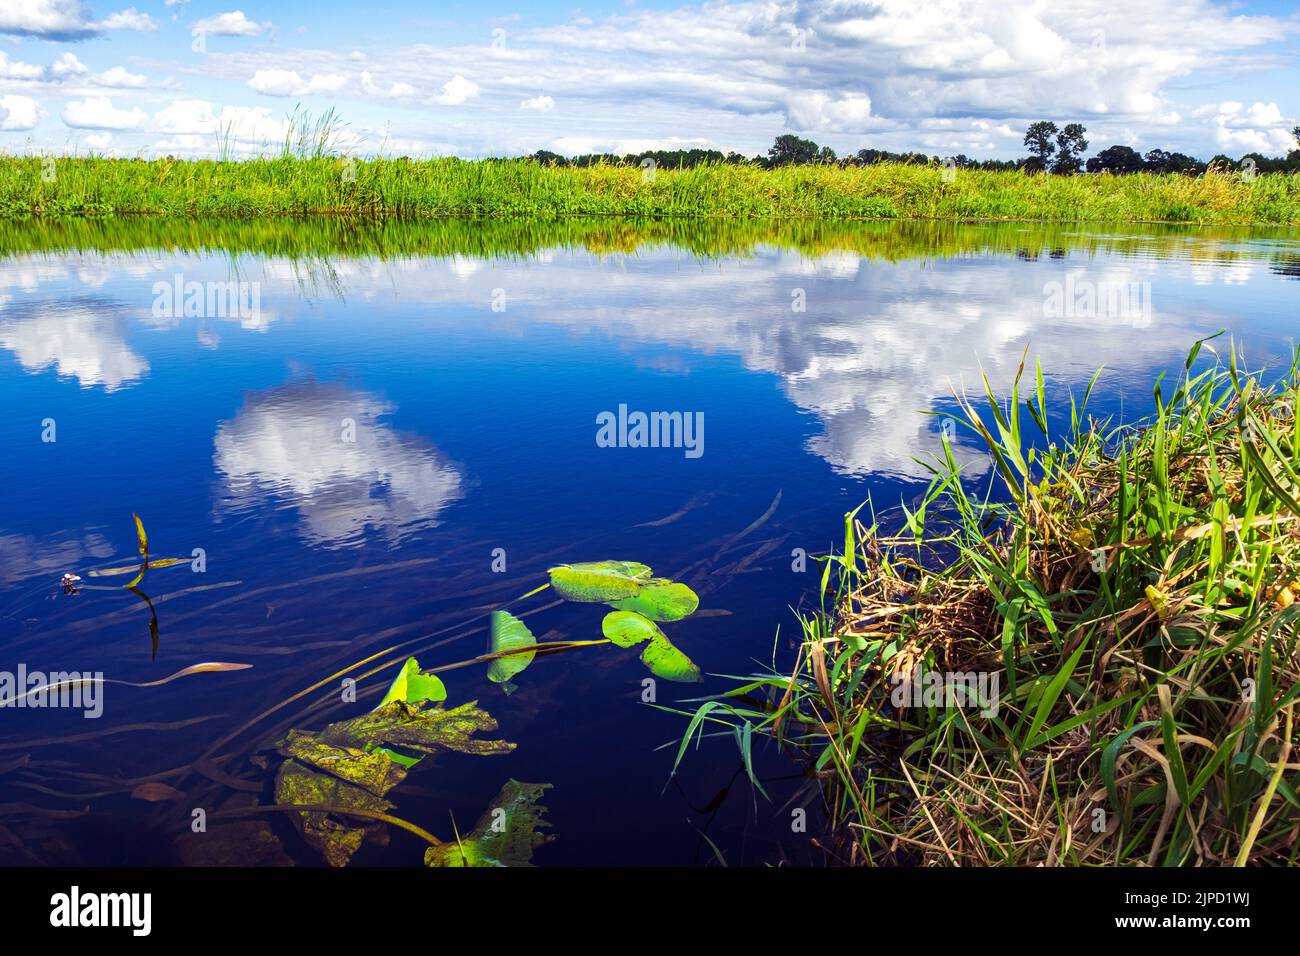 Idyll summer nature landscape, Biebrza river with clouds reflections in water, rushes and water plants. Countryside nature. Stock Photo